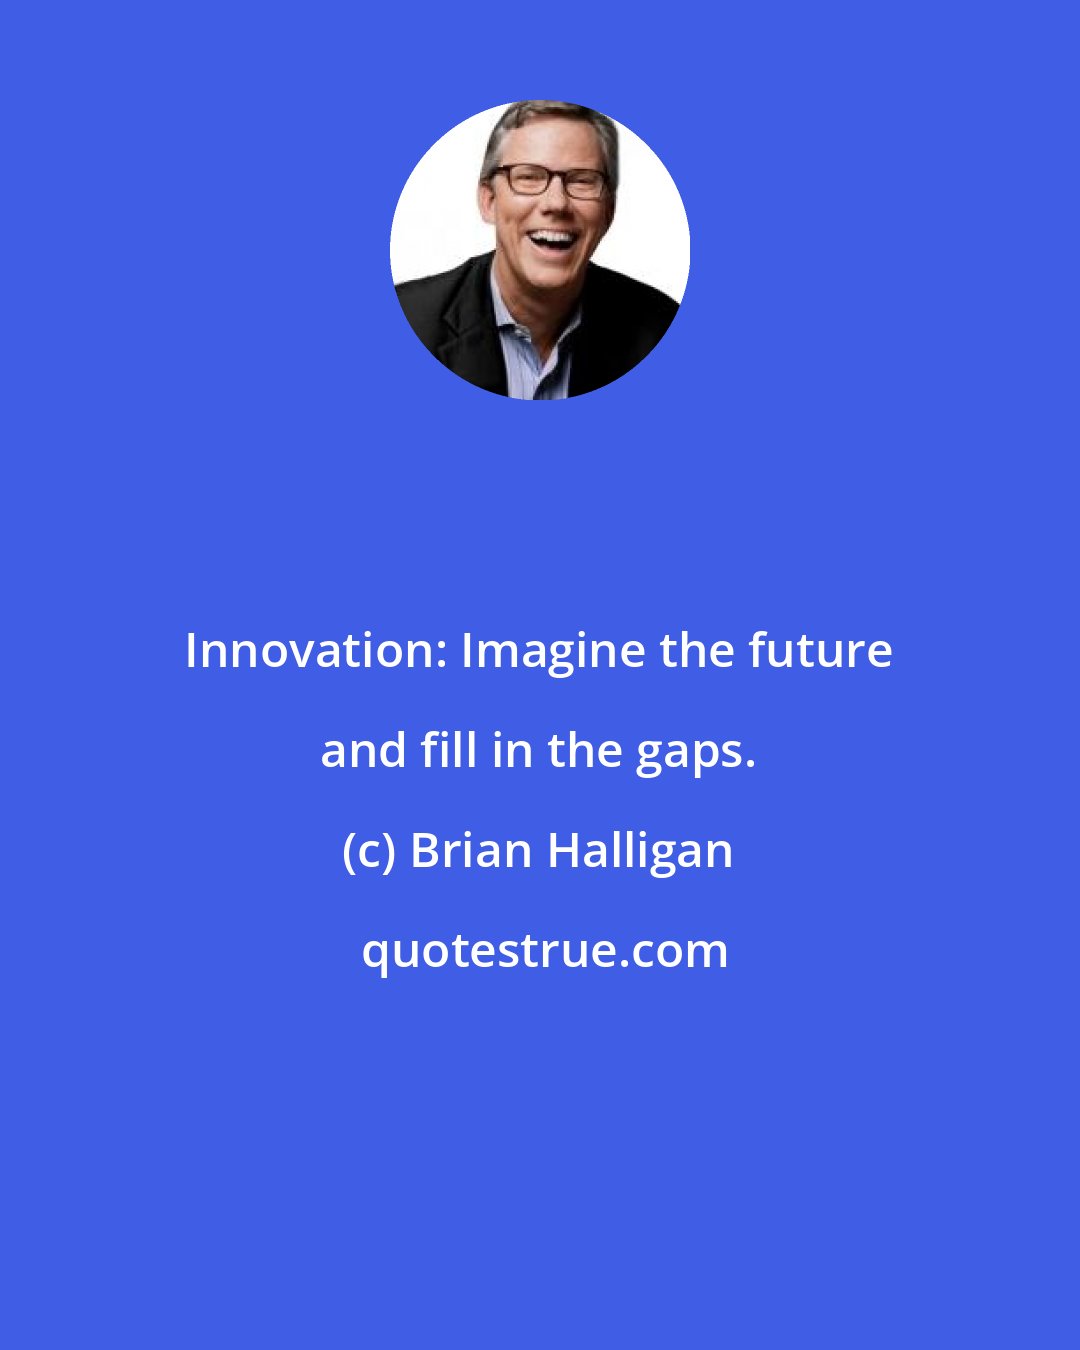 Brian Halligan: Innovation: Imagine the future and fill in the gaps.